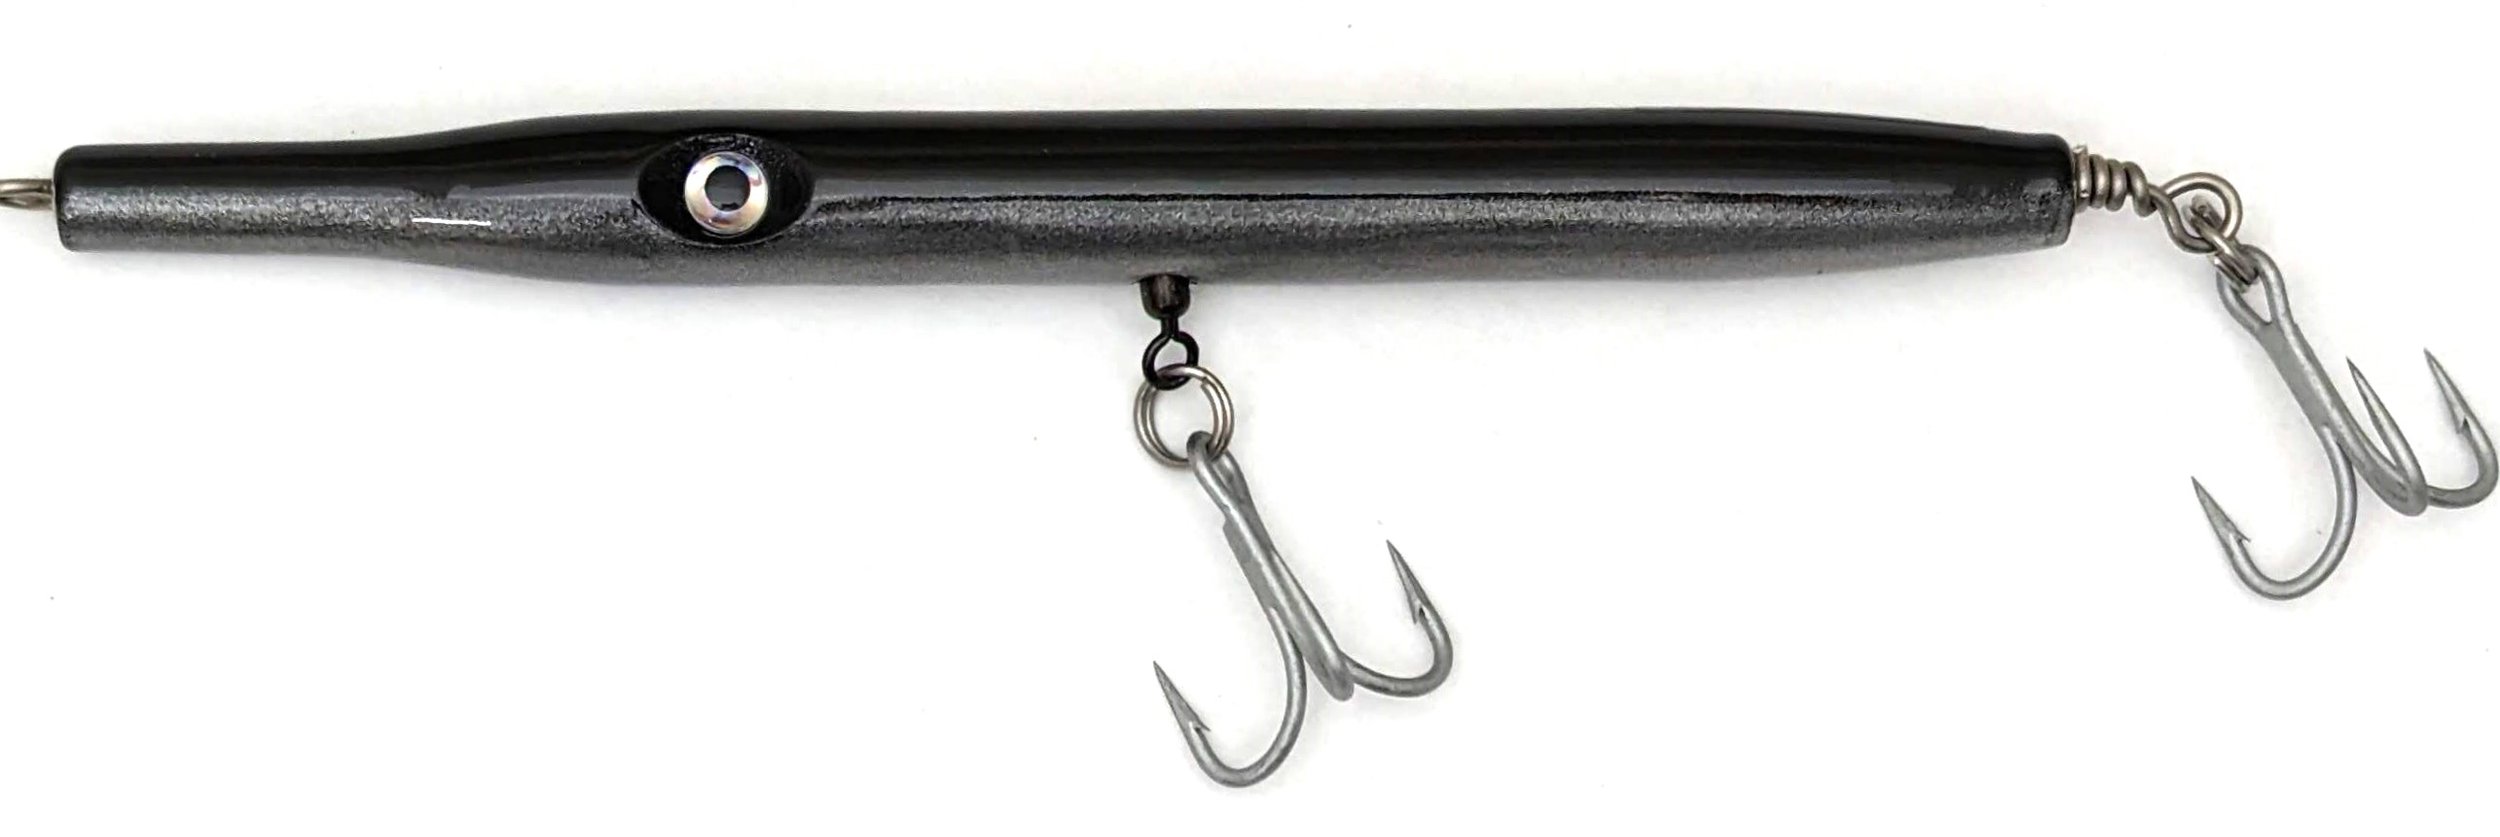 Rod Blanks — New Surfcasting Gear — The Surfcaster - Trusted Fishing  Supplies For Over 40 Years